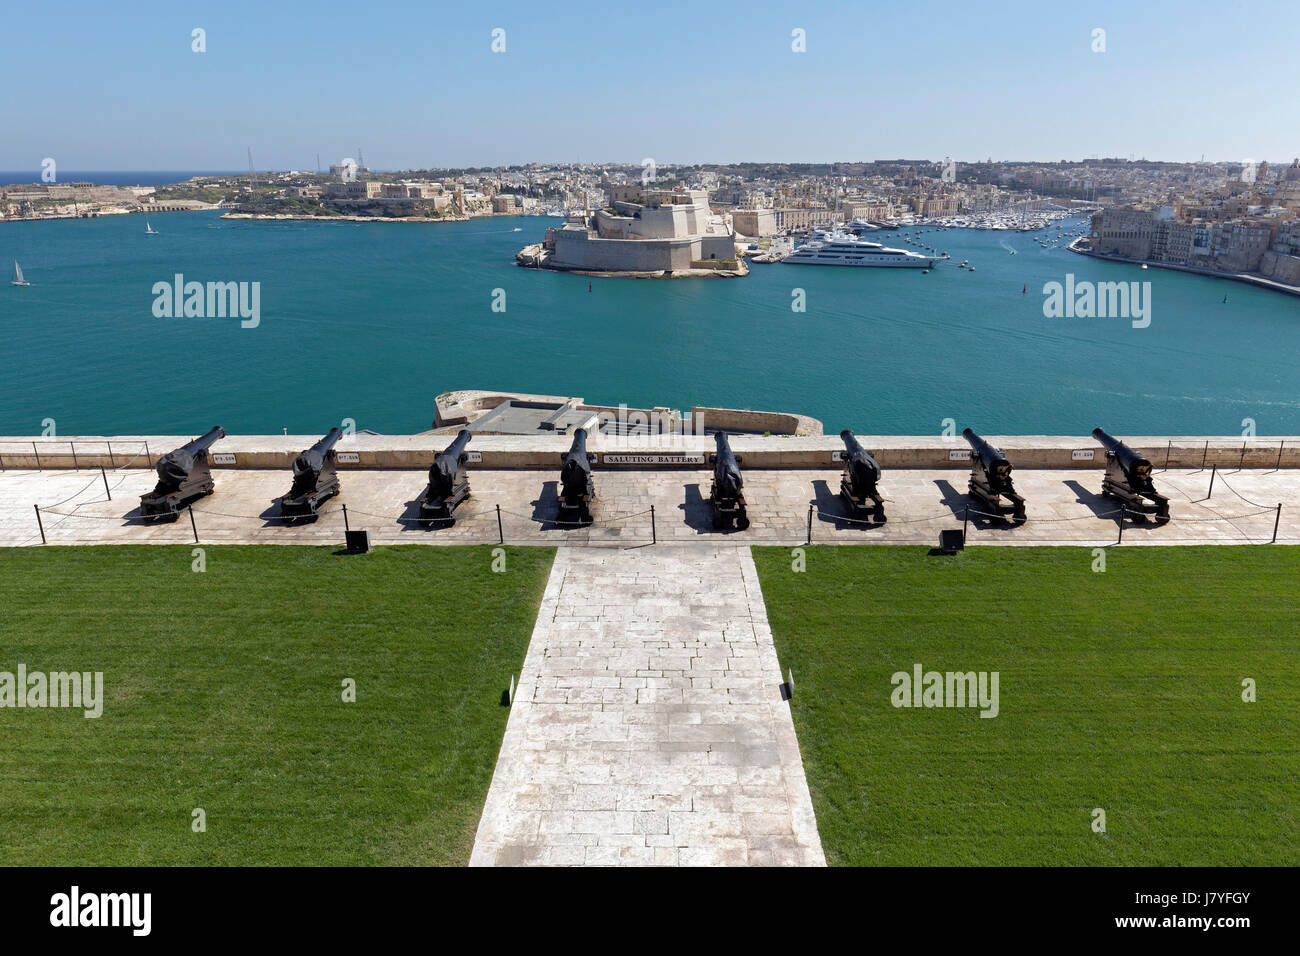 Cannons of the Saluting Battery, view of Three Cities and Grand Harbor, Valletta, Malta Stock Photo